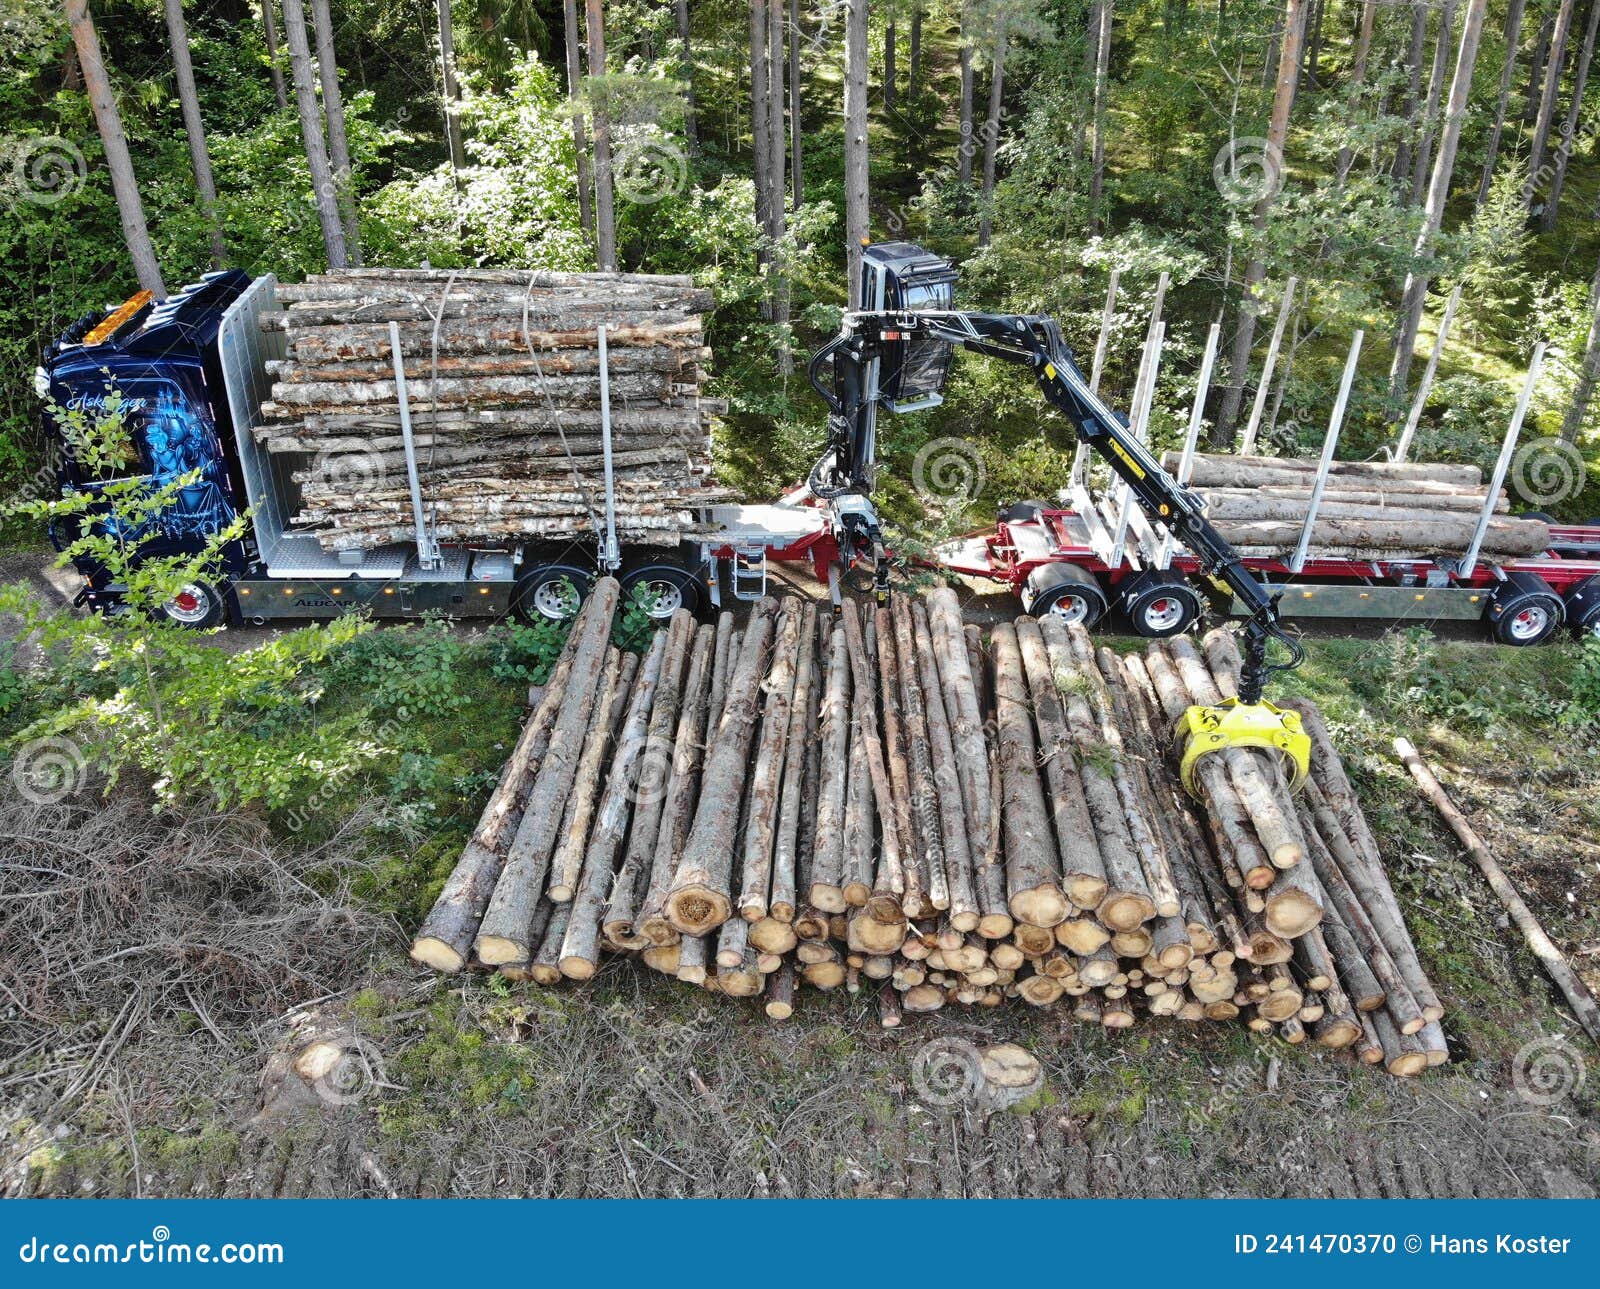 scania logging truck loading pine trees in the forest